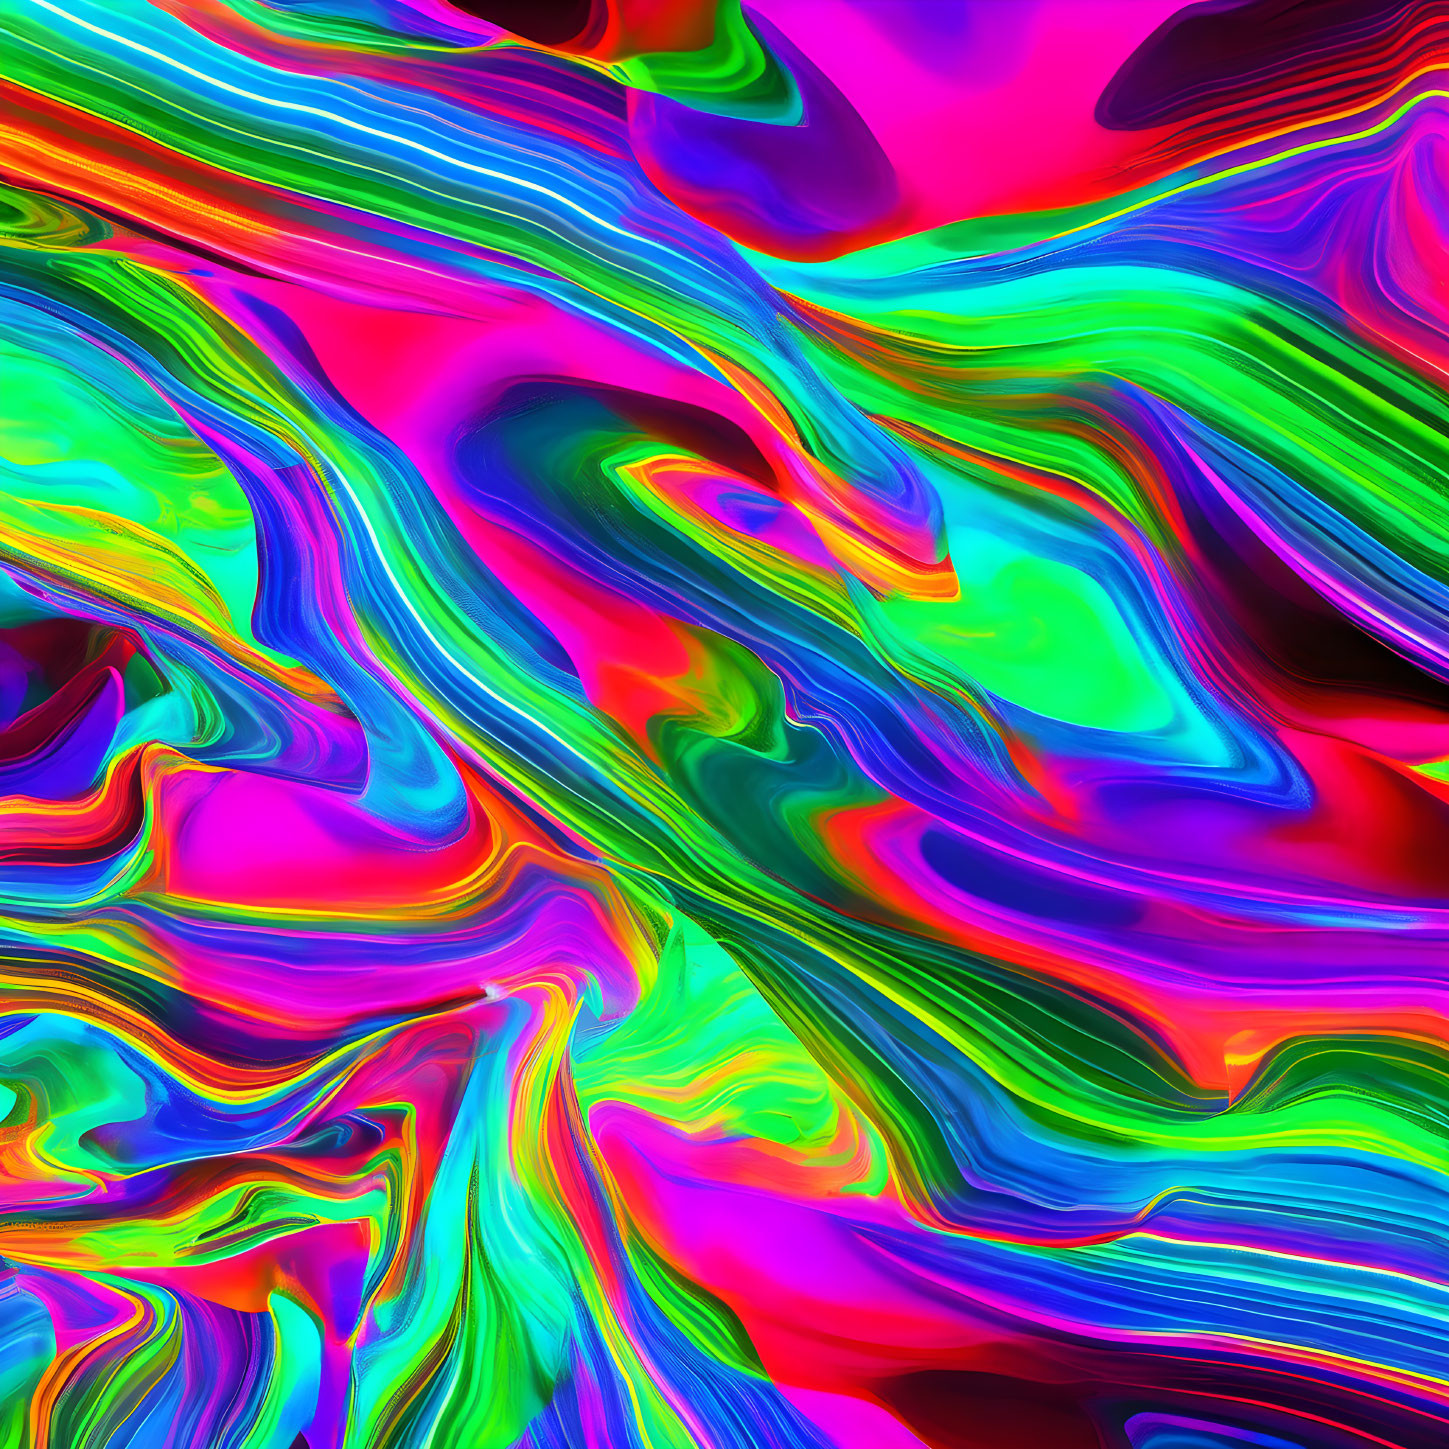 Colorful Neon Wavy Patterns in Psychedelic Digital Art